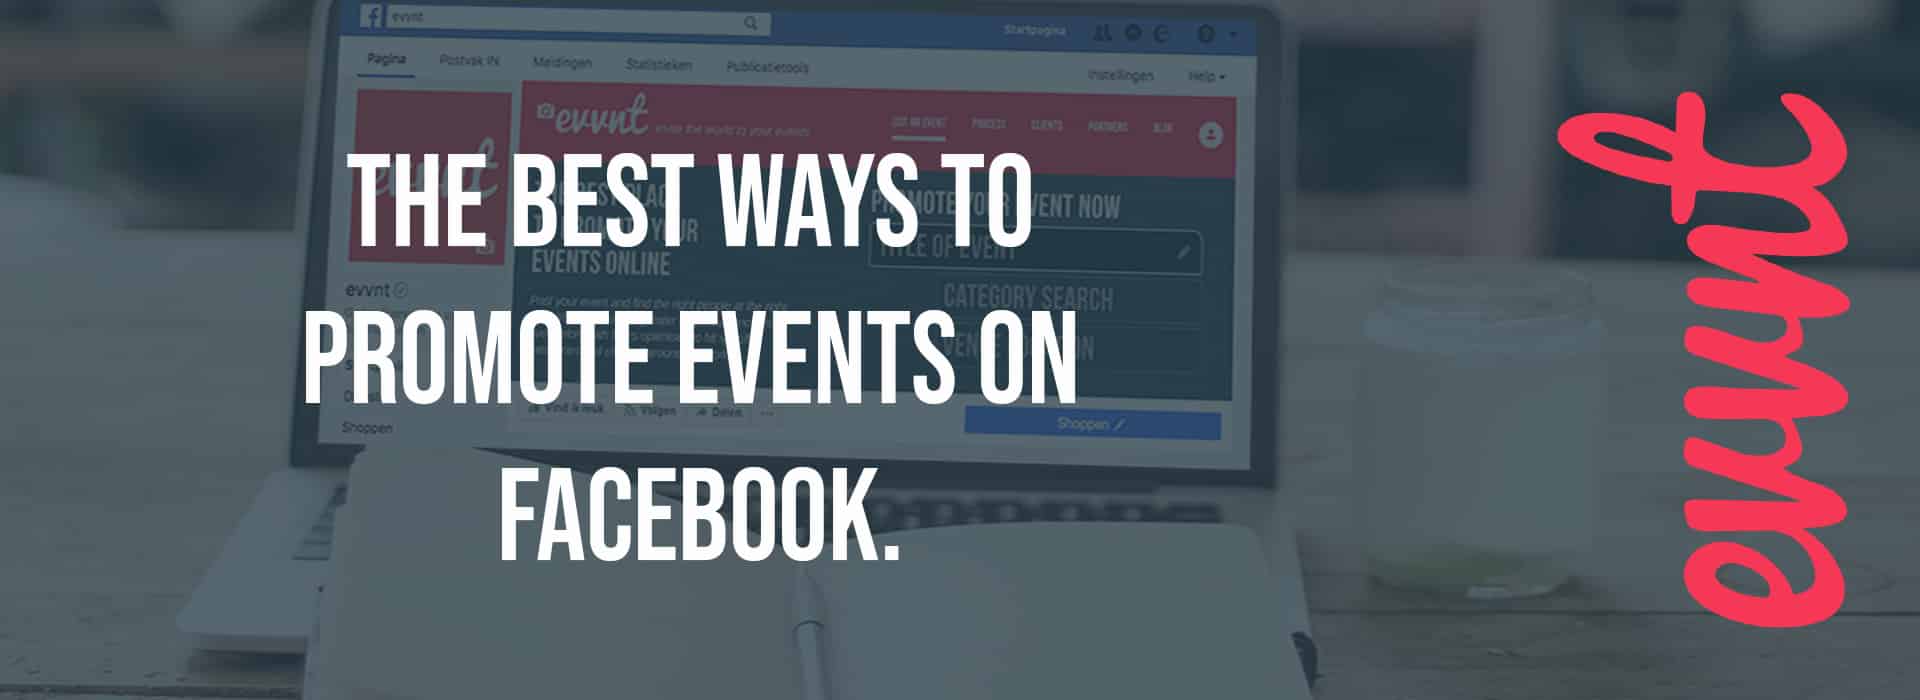 The Best Ways to Promote Events on Facebook